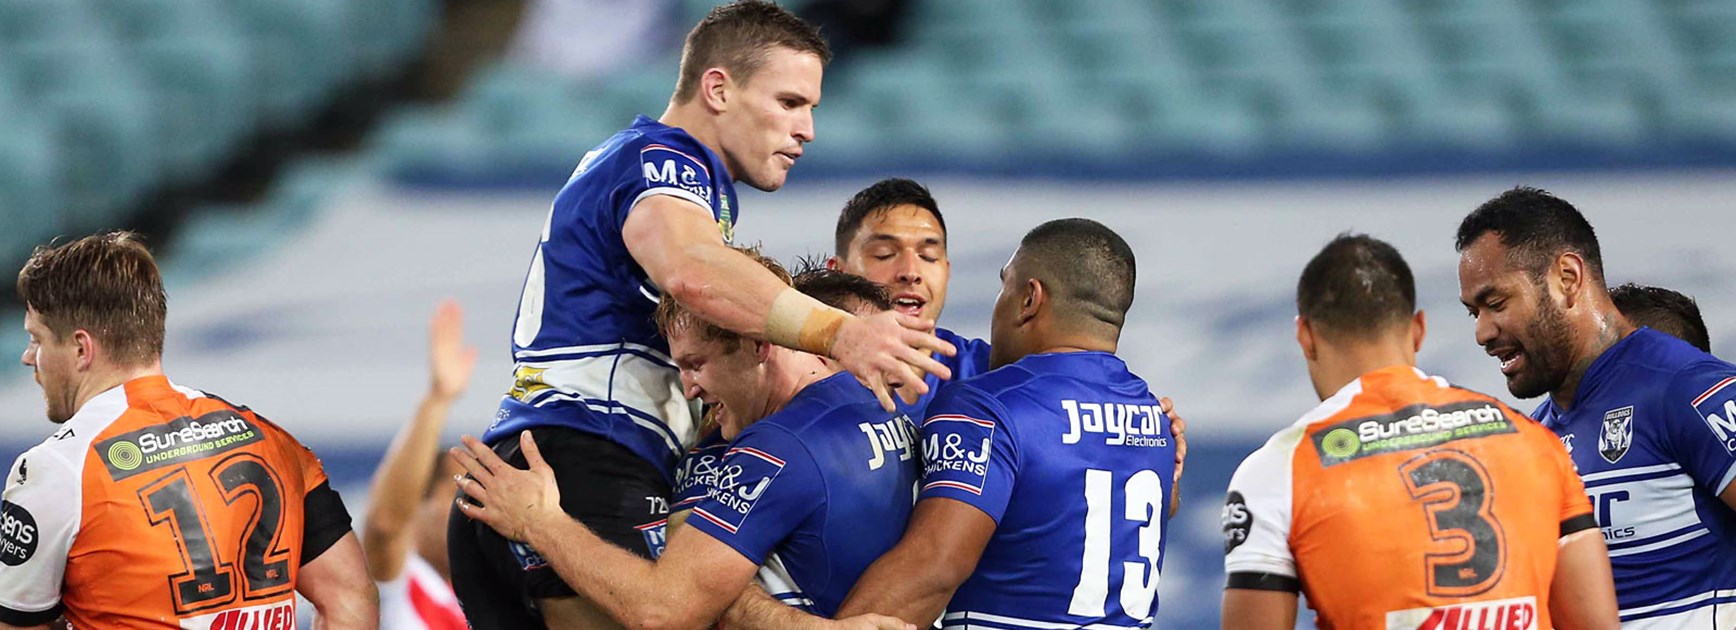 Bulldogs players celebrate during their victory over Wests Tigers.